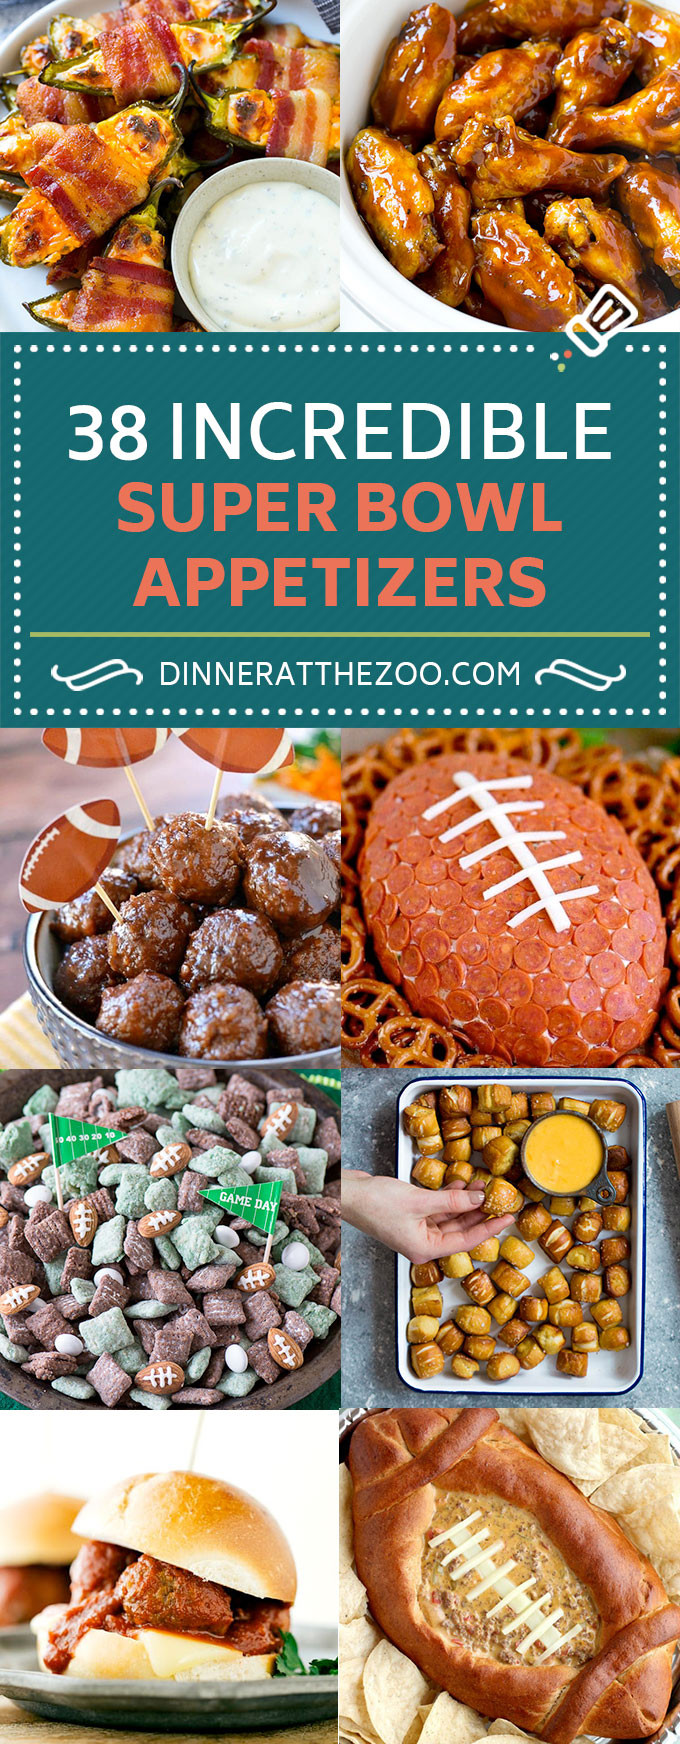 Super Bowl Dinner
 45 Incredible Super Bowl Appetizer Recipes Dinner at the Zoo